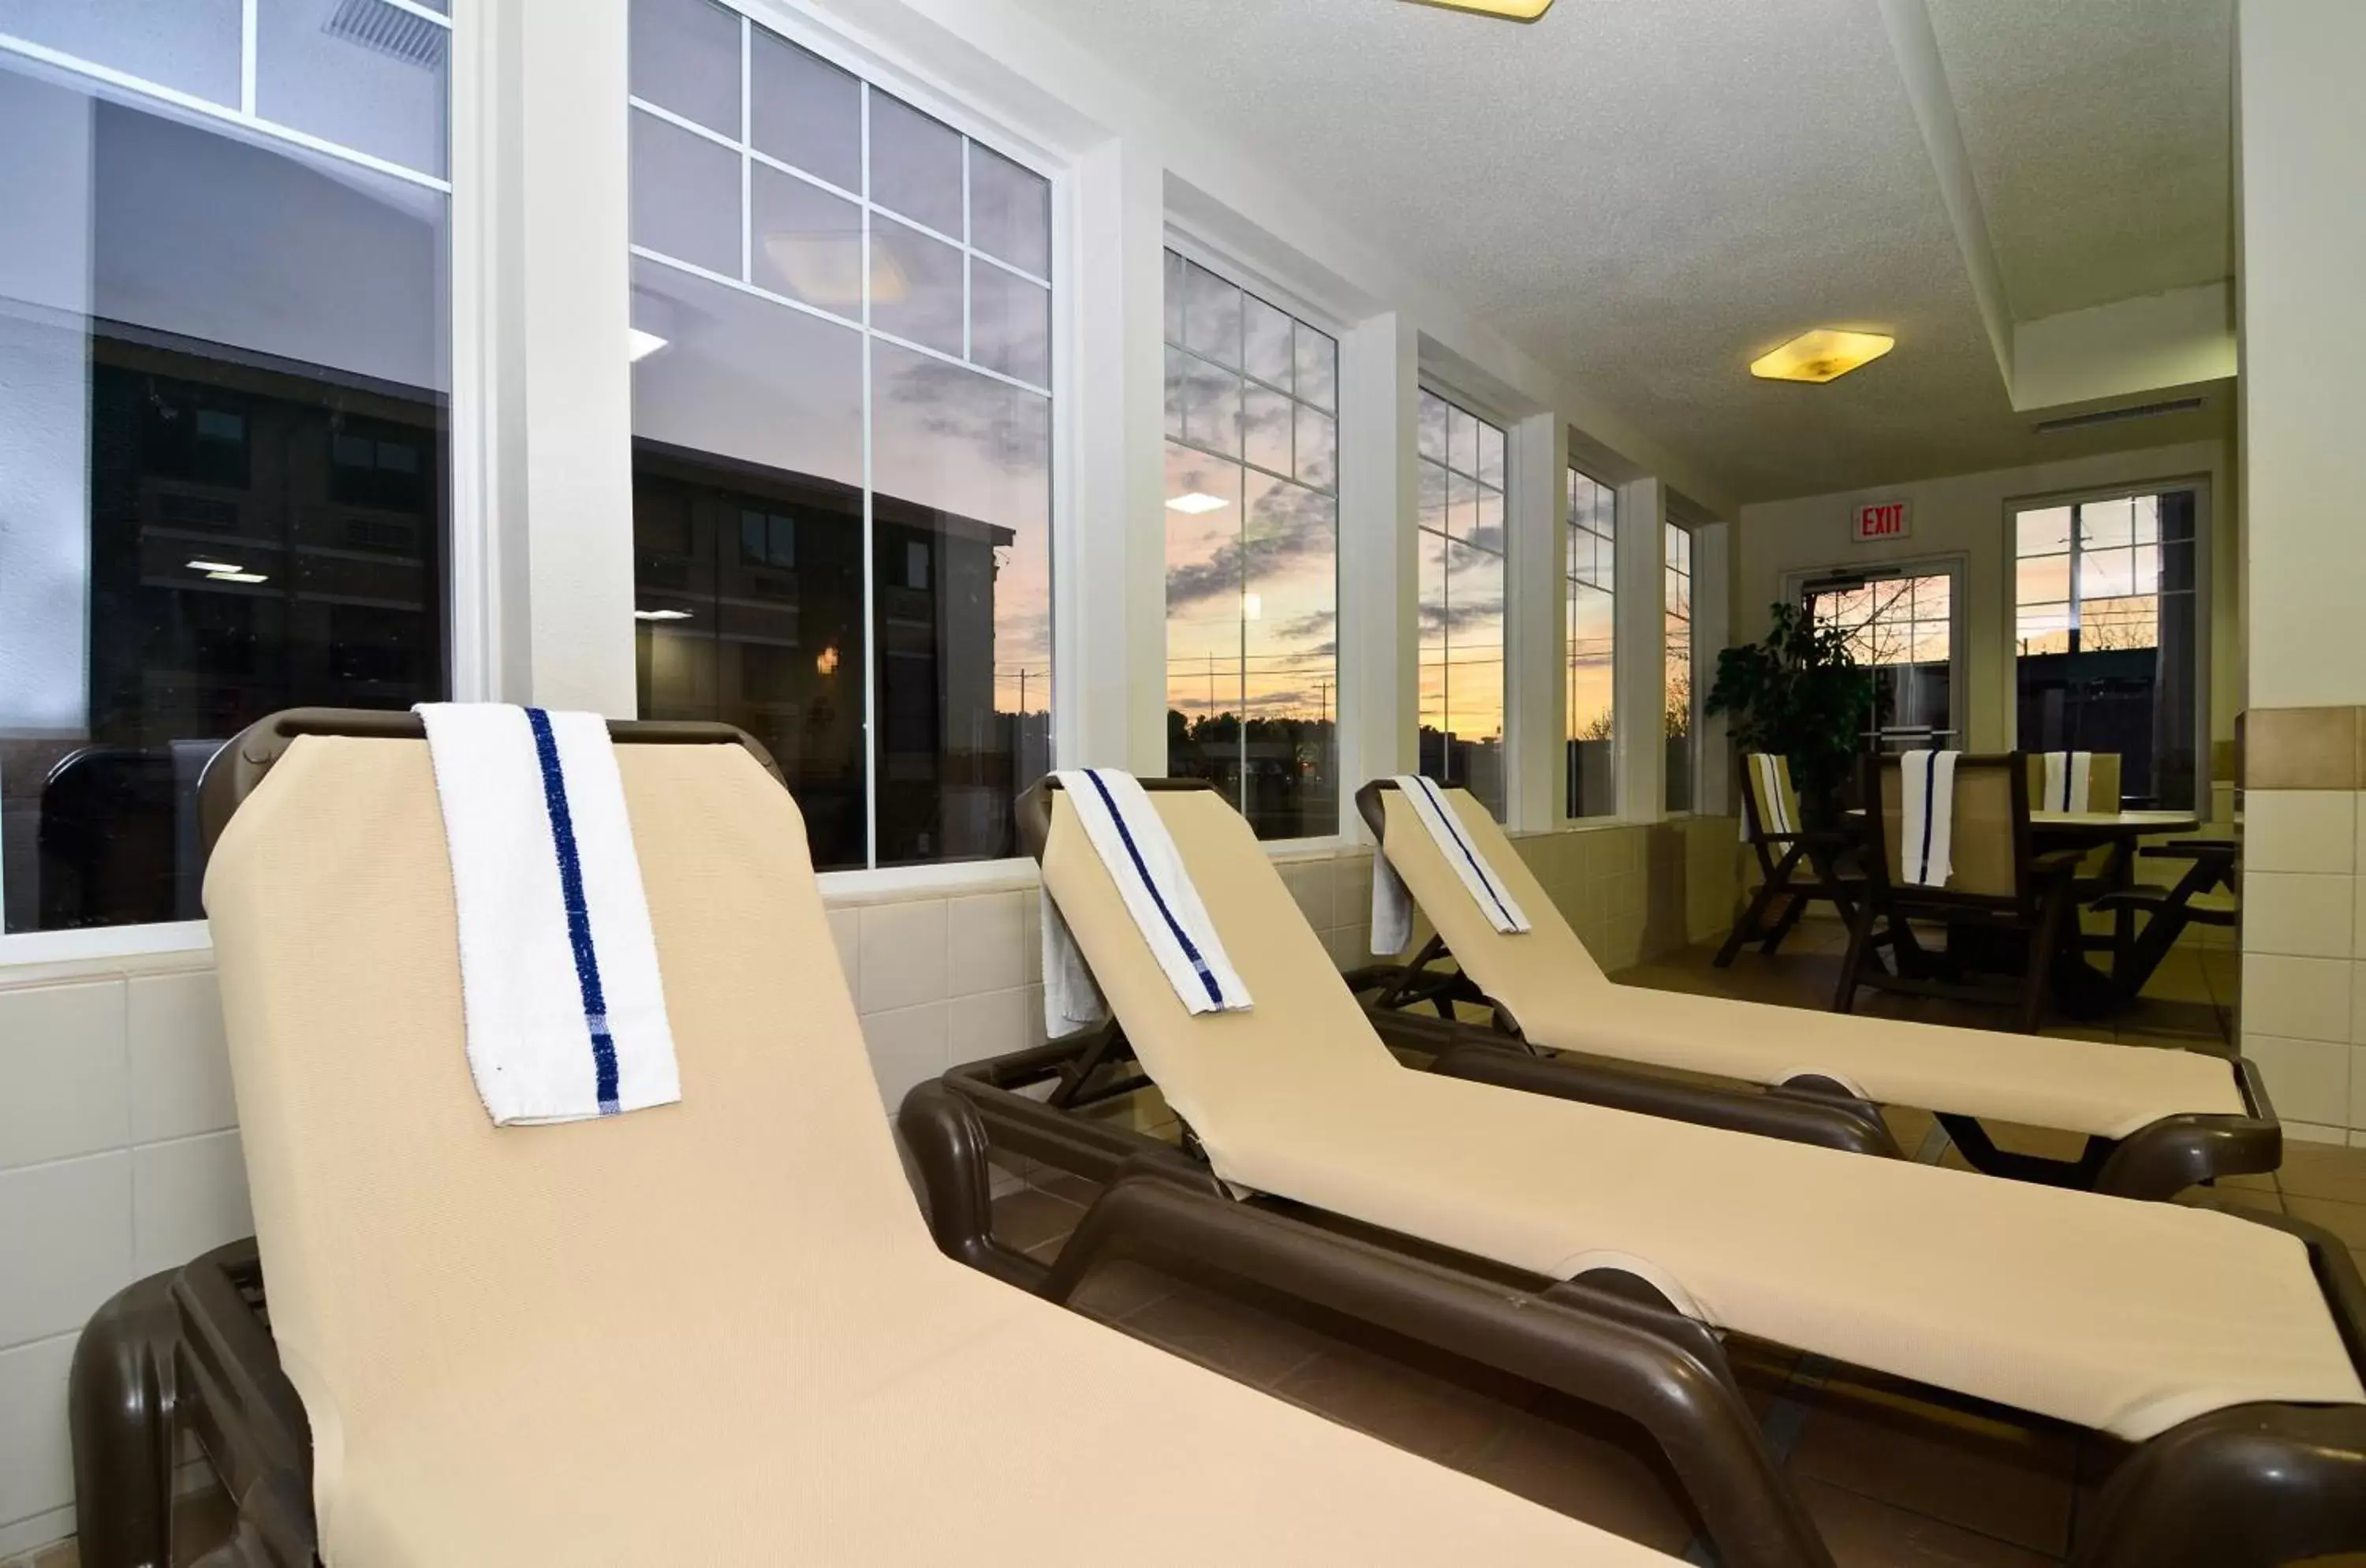 Swimming pool, Fitness Center/Facilities in Country Inn & Suites by Radisson, Stevens Point, WI